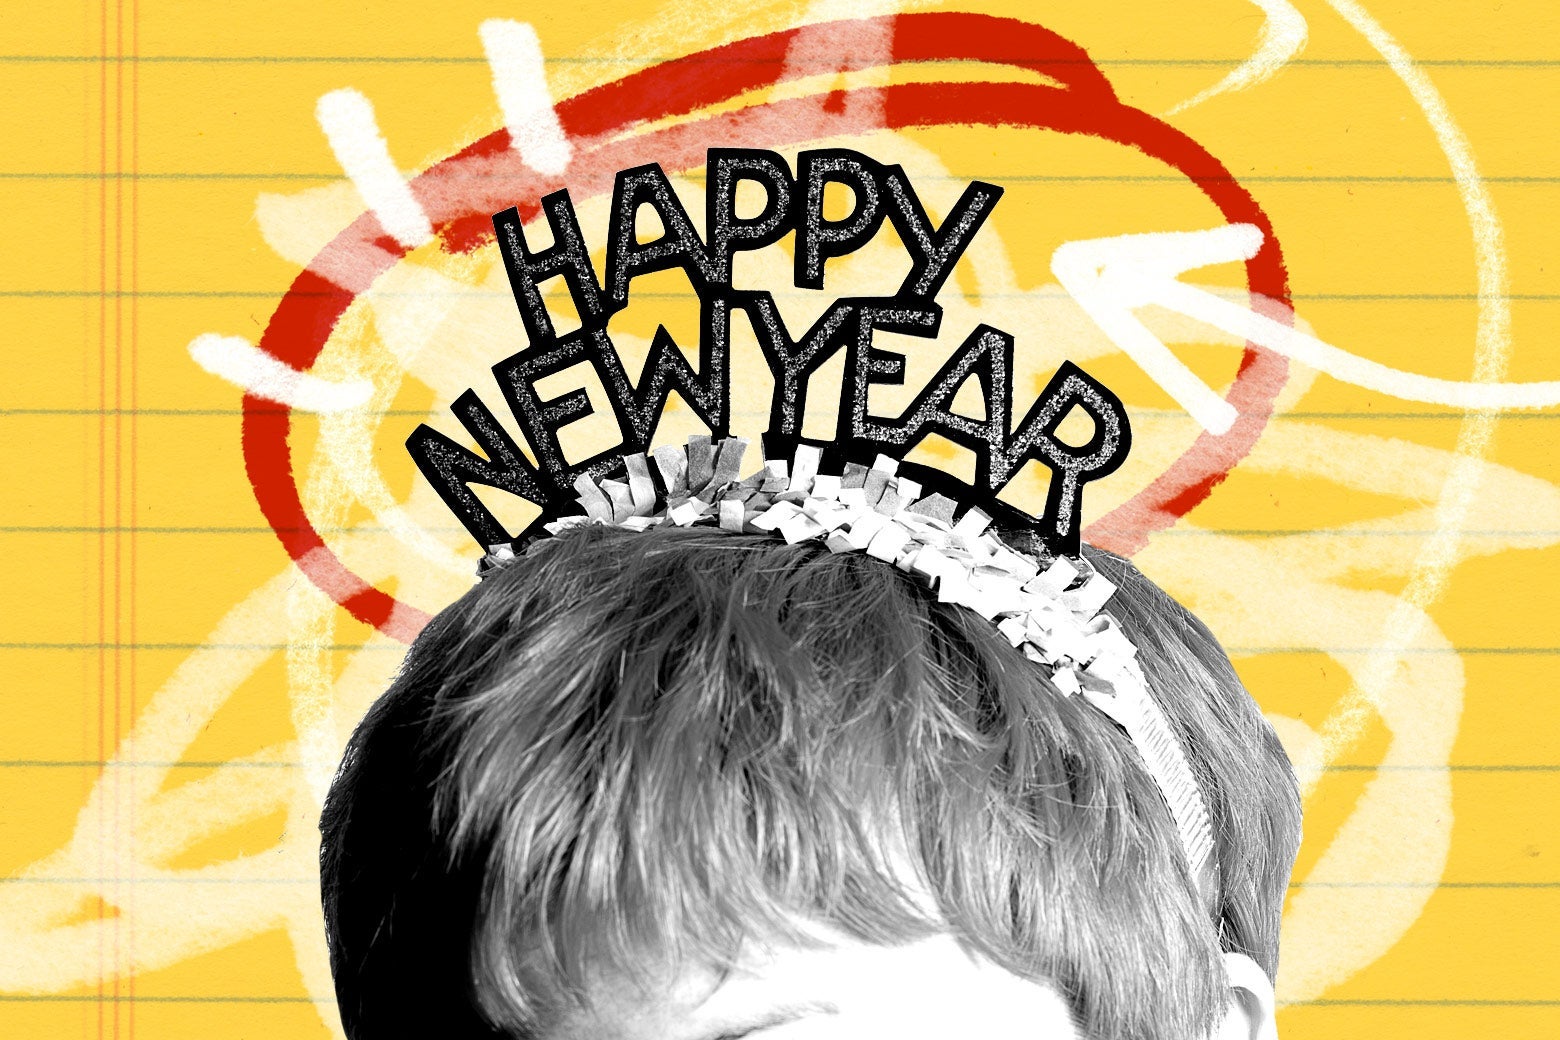 Photo illustration of a person wearing a "Happy New Year" hat.